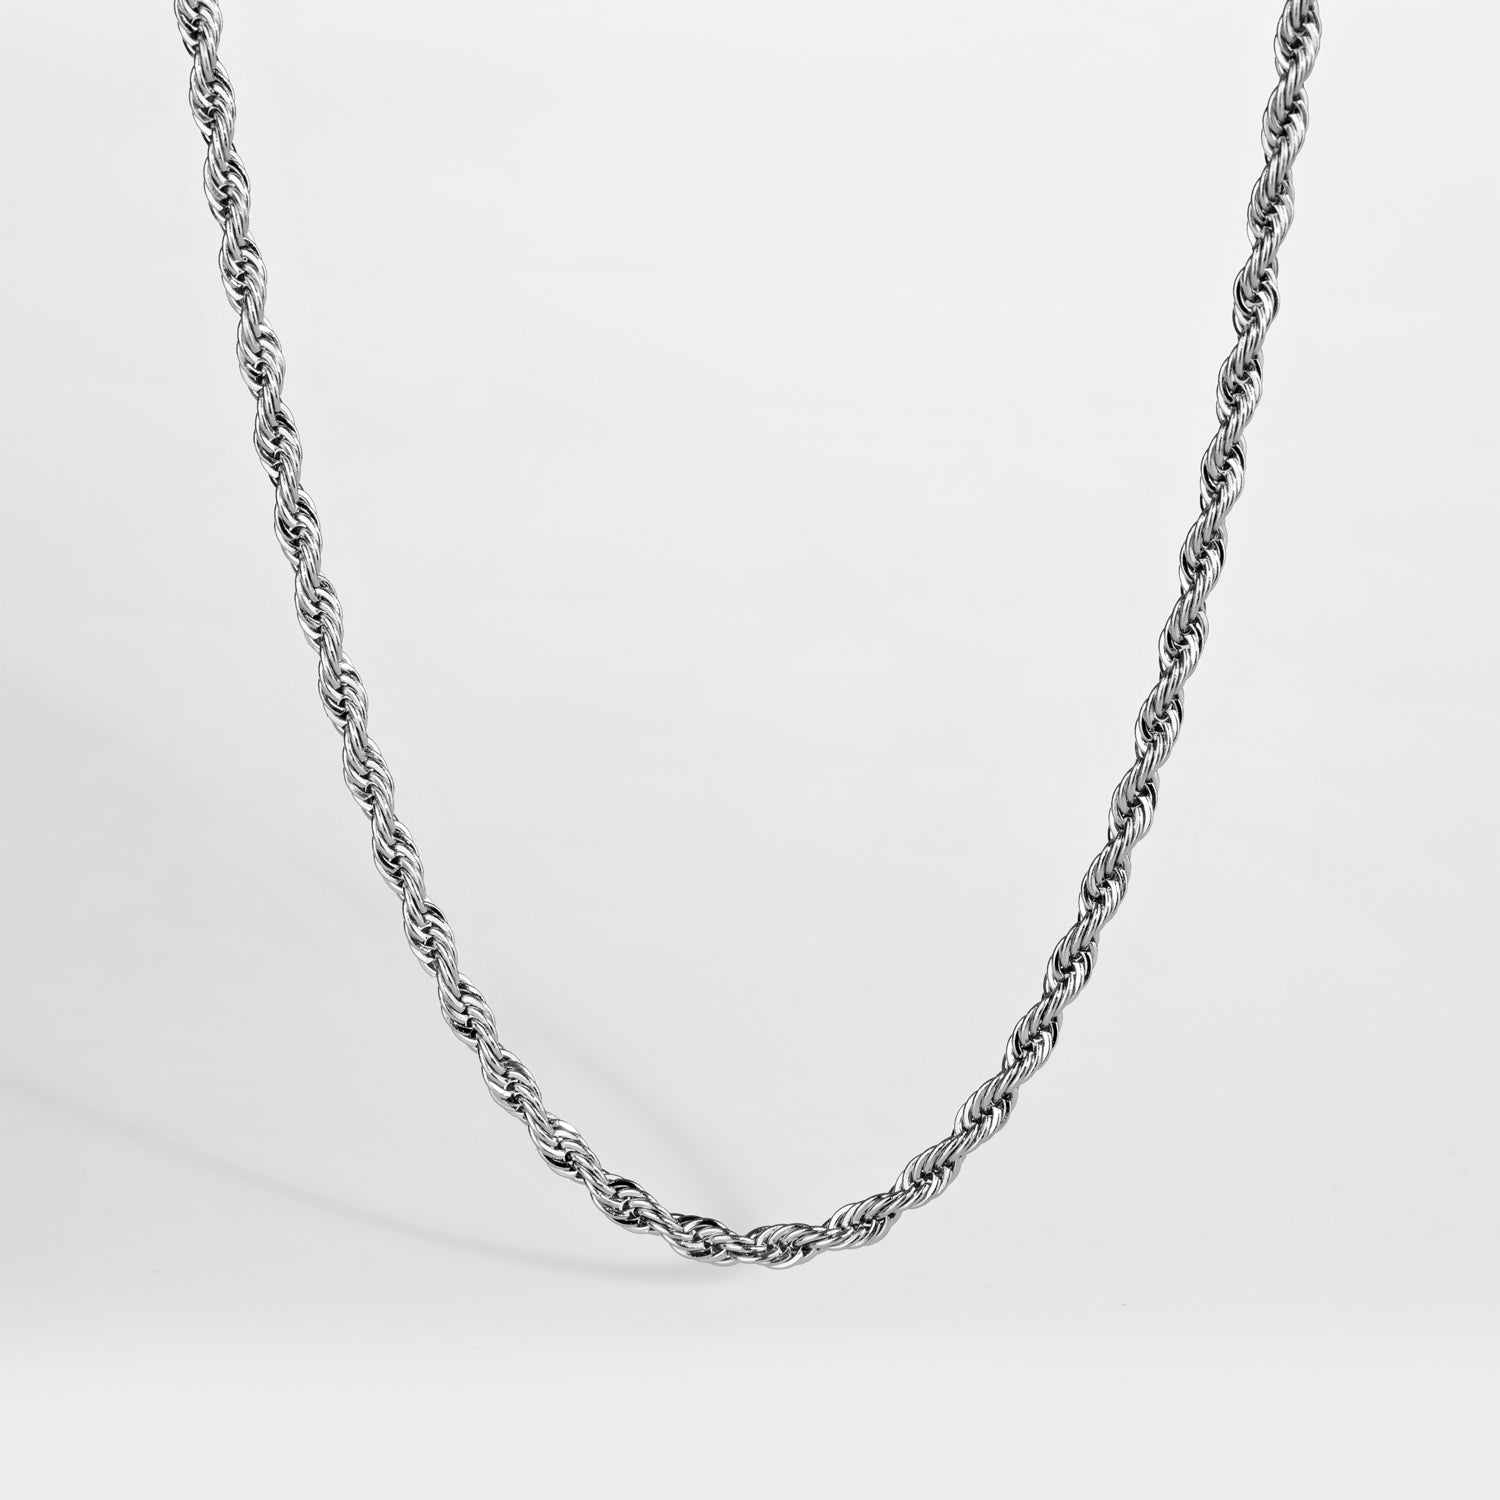 NL Rope necklace - Silver-toned